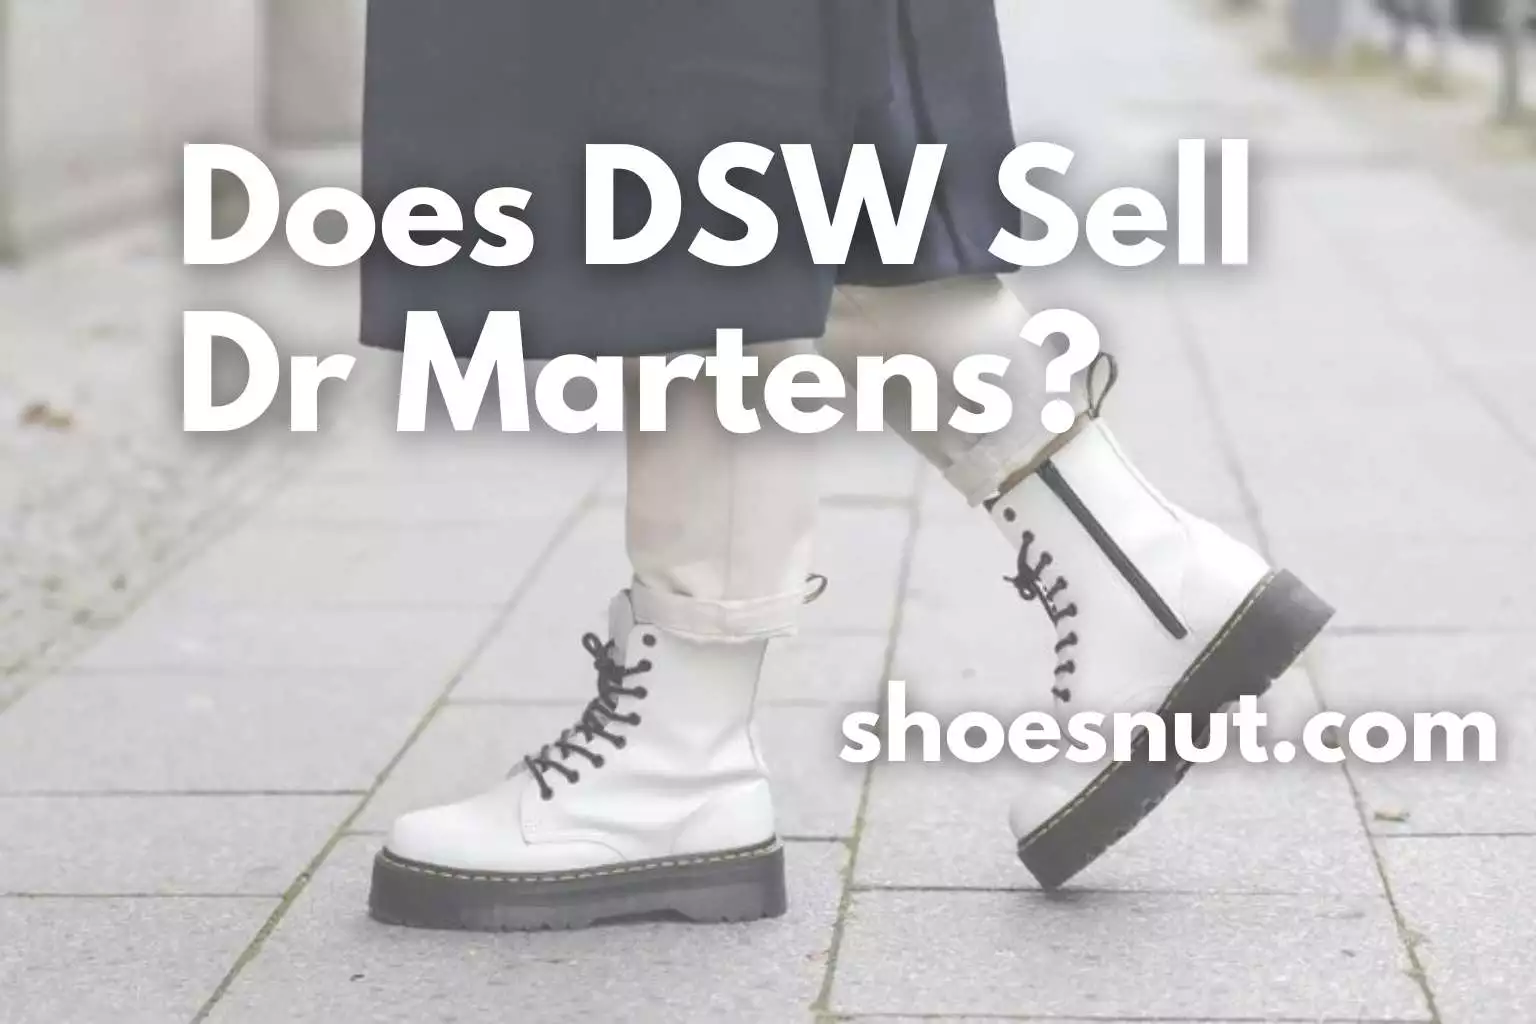 Does DSW Sell Dr Martens?